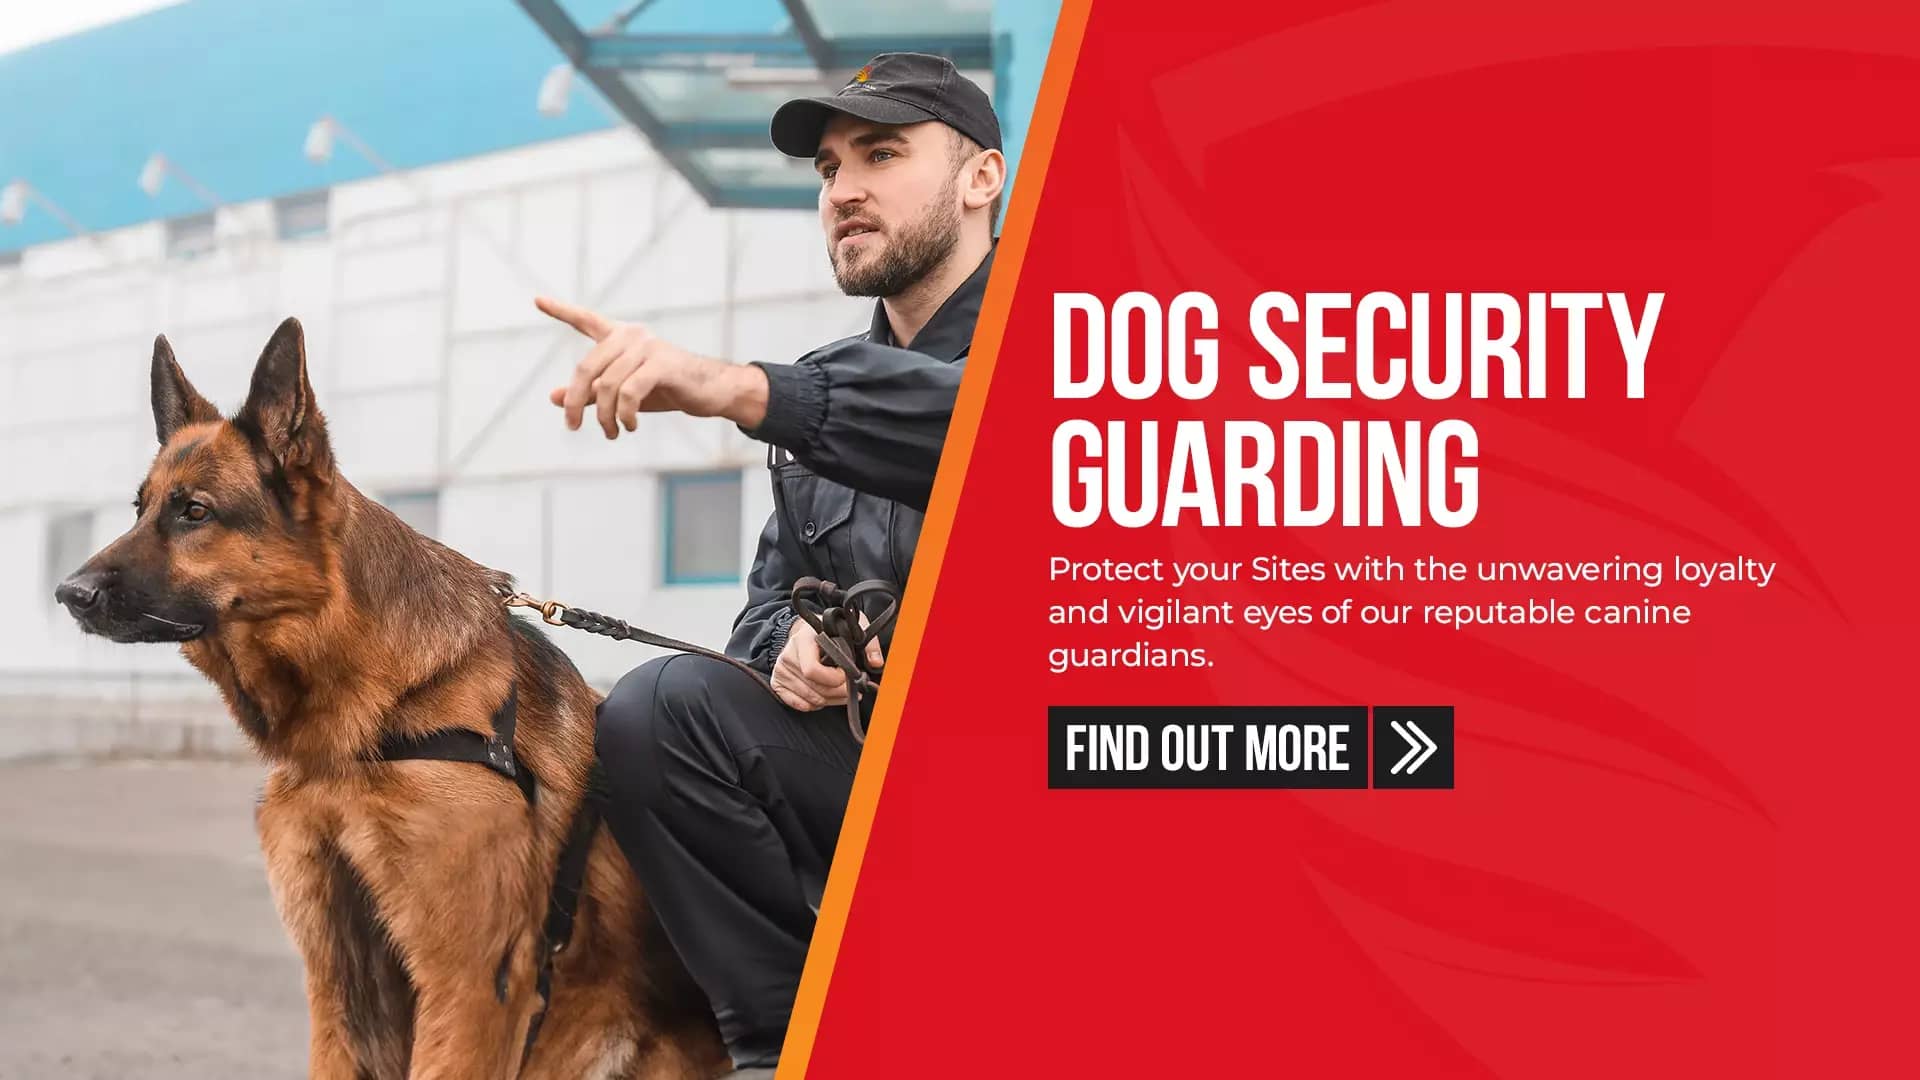 Dog Security K9 by guard mark security